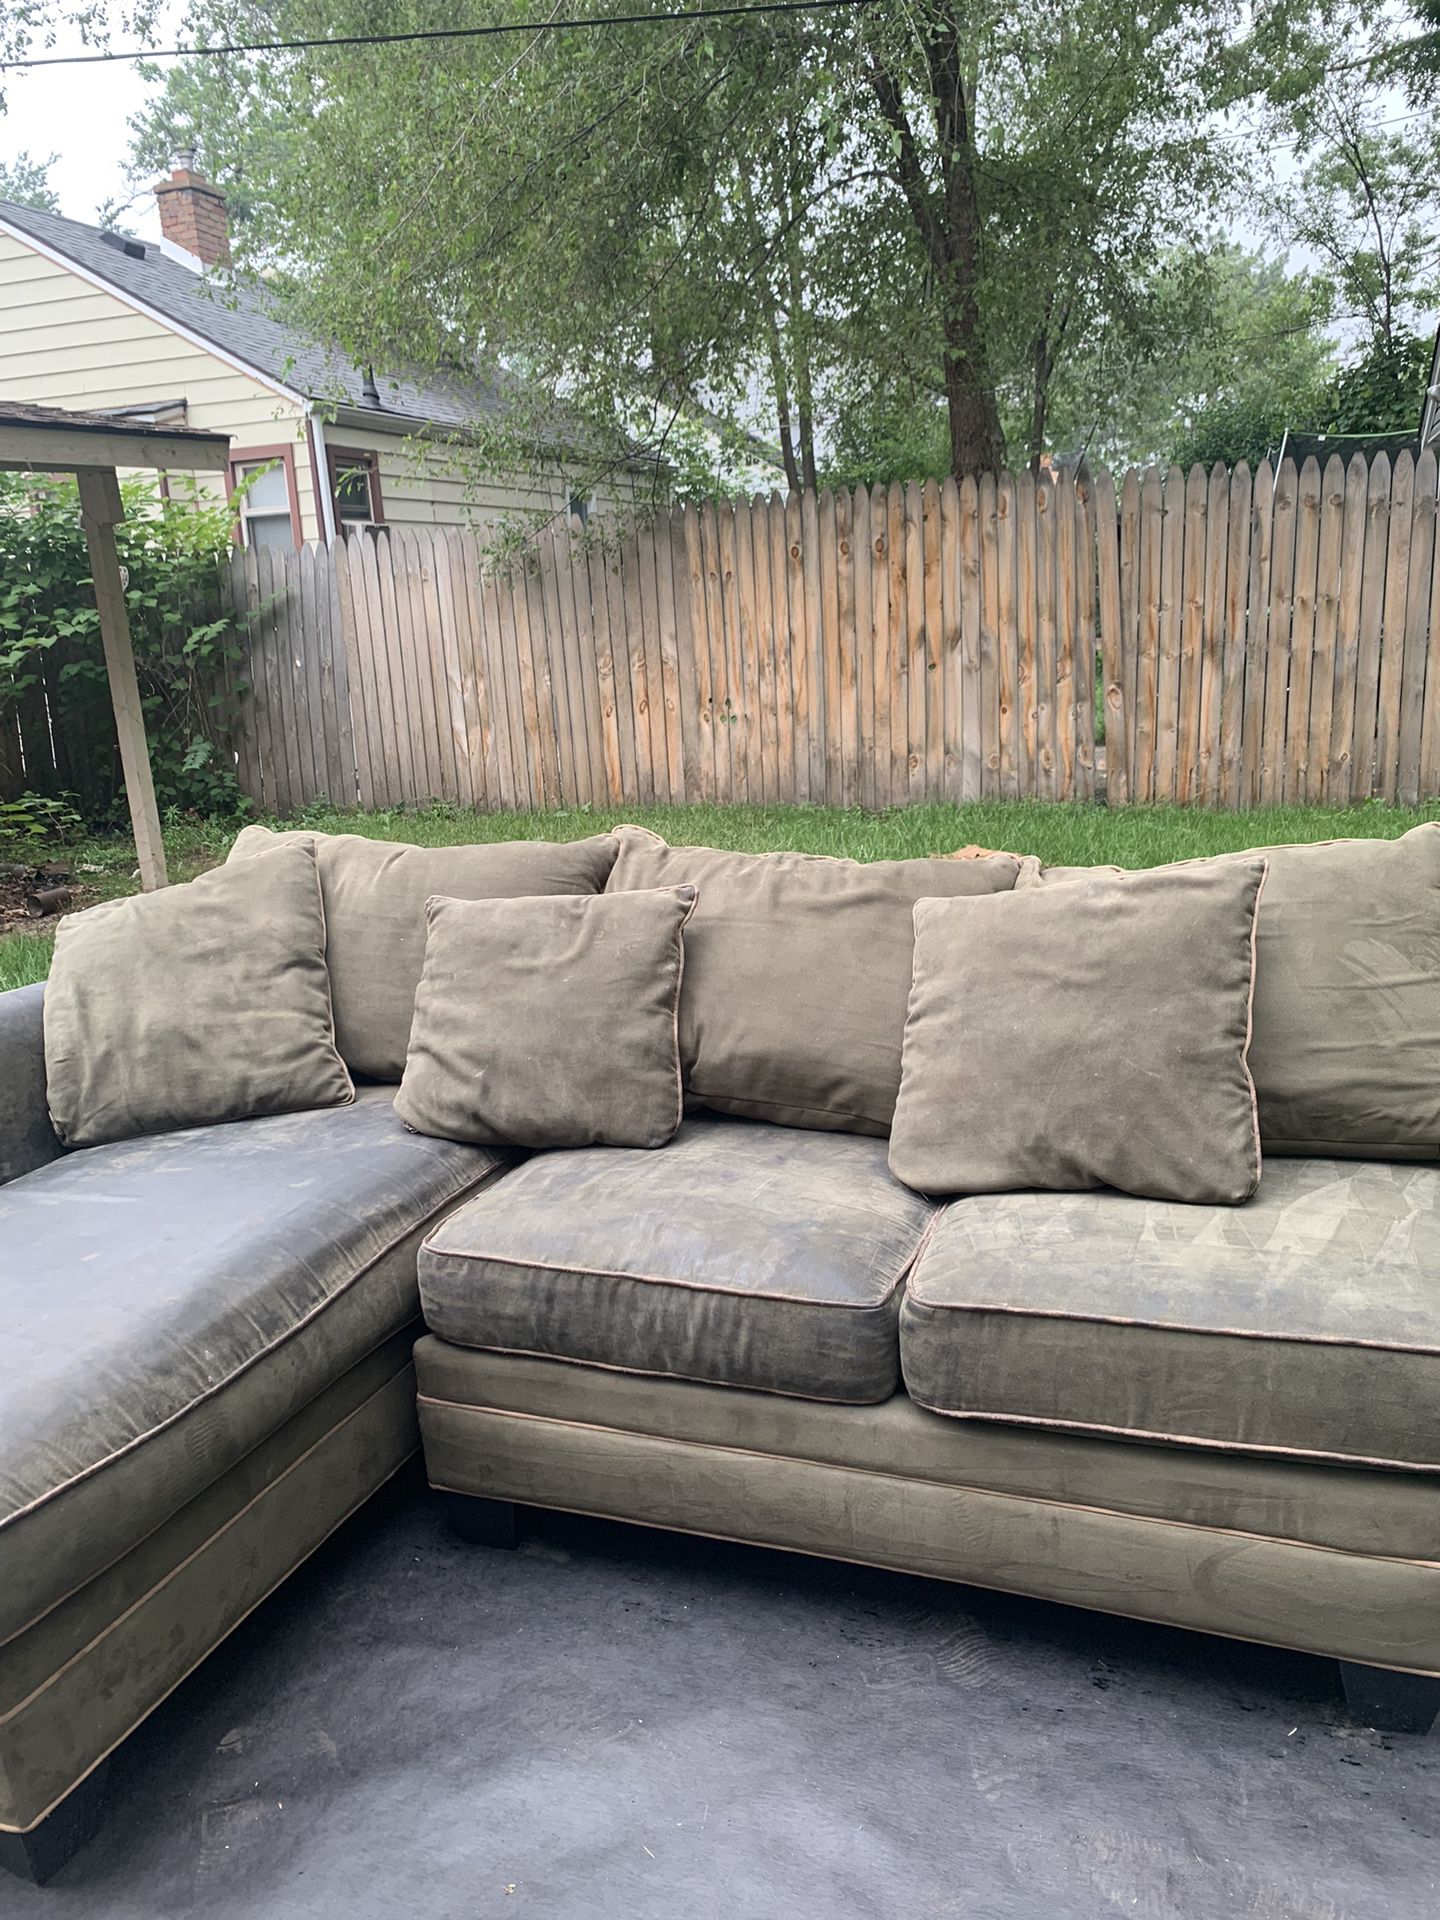  Couch / Sofa For Sale Need Gone ASAP !!